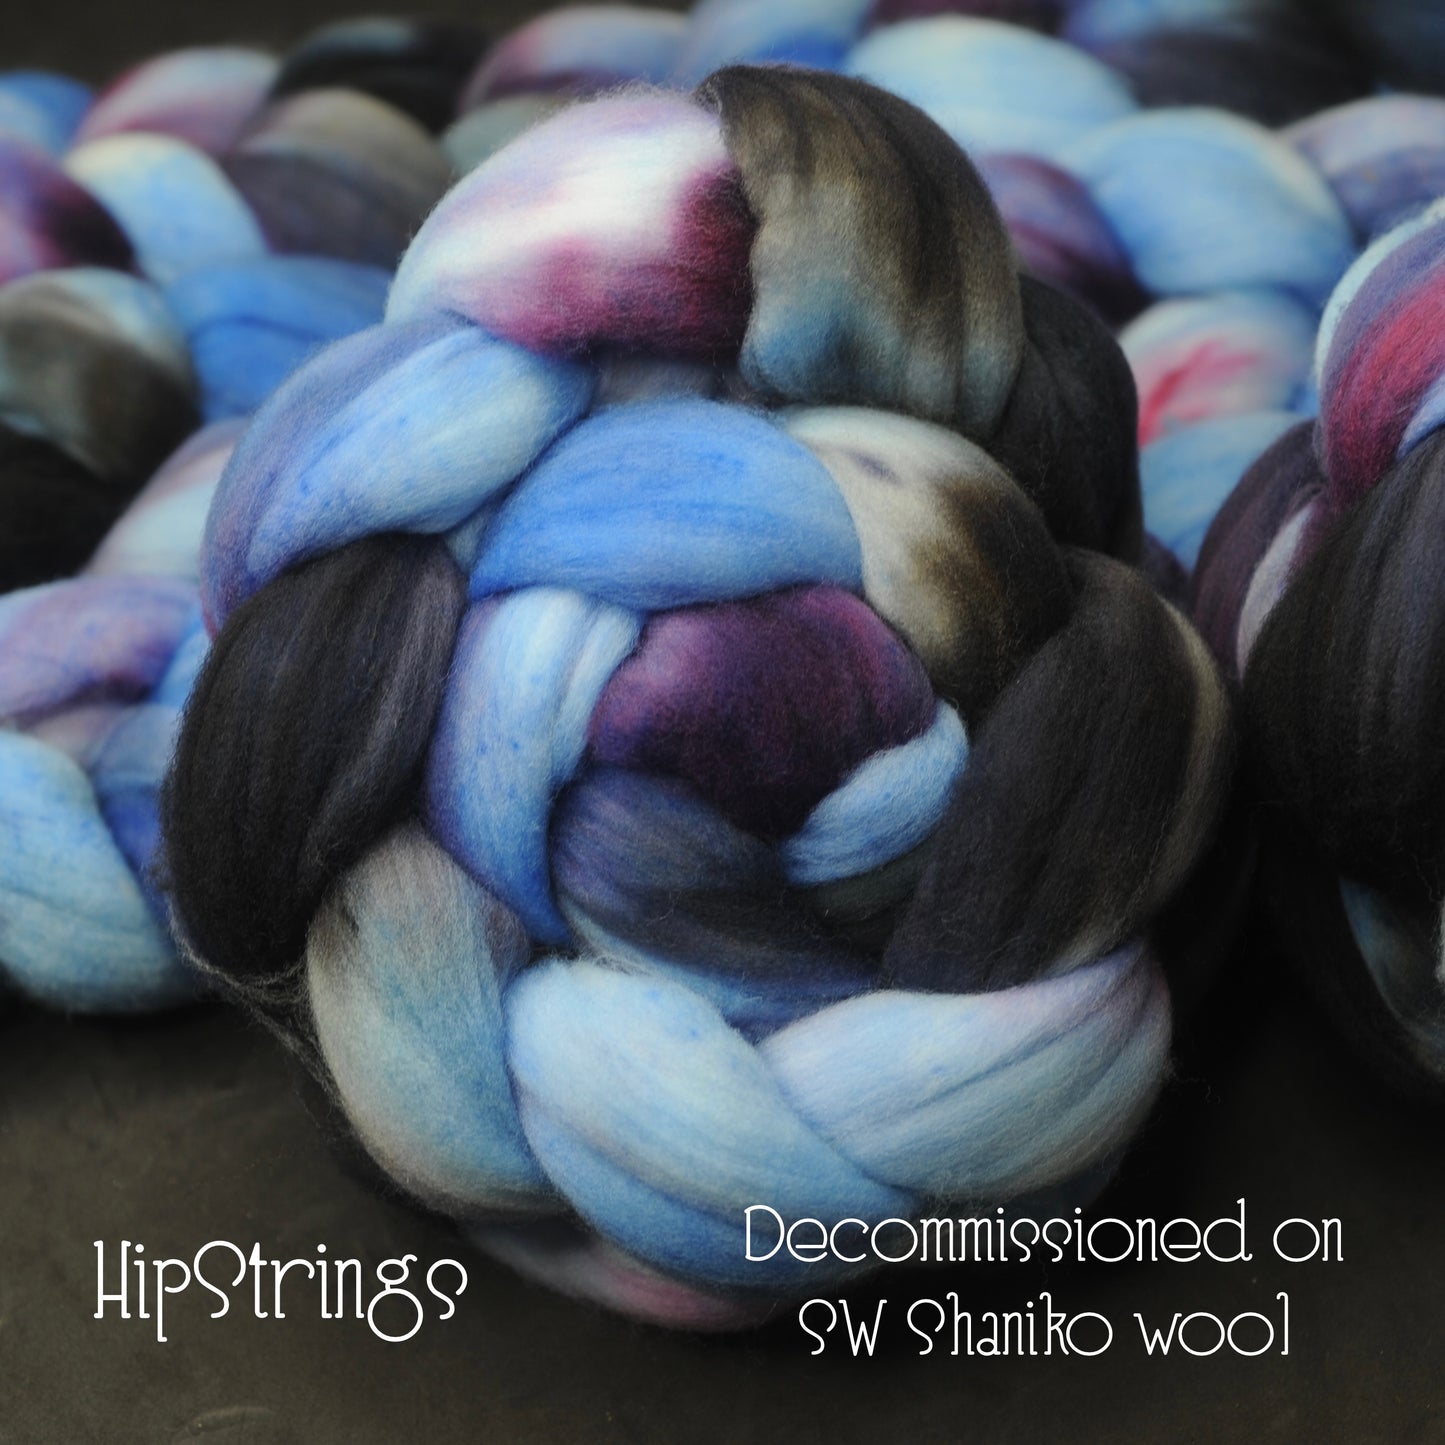 Decommissioned on Hand Dyed SW Shaniko Wool Combed Top - 4 oz